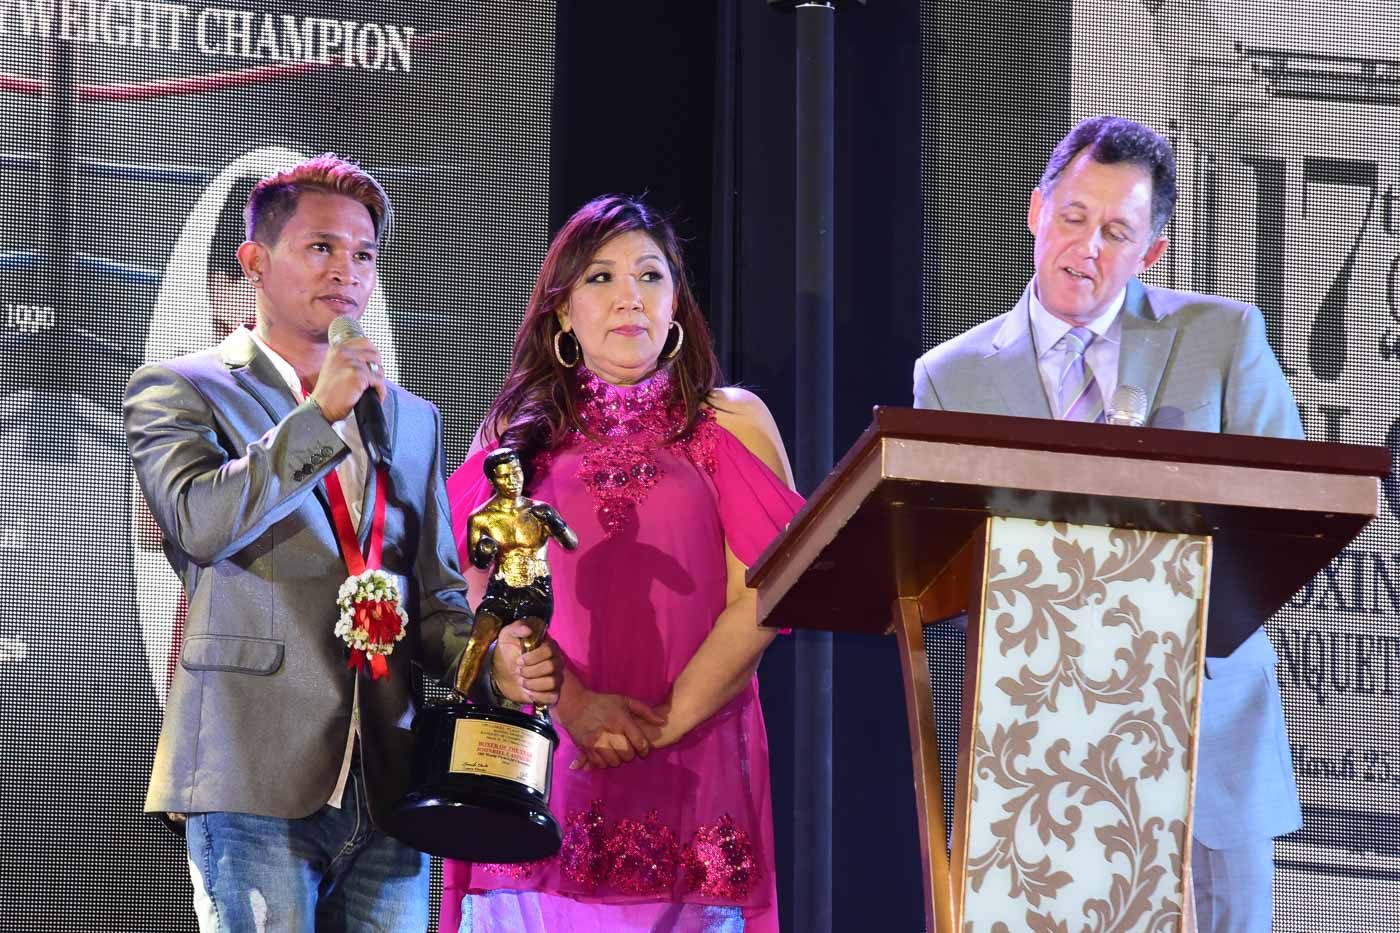 Johnriel Casimero, who shocked many with his knockout win over Amnat Ruenroeng to win the IBF flyweight title, speaks alongside Liza Elorde and Ted Lerner. 